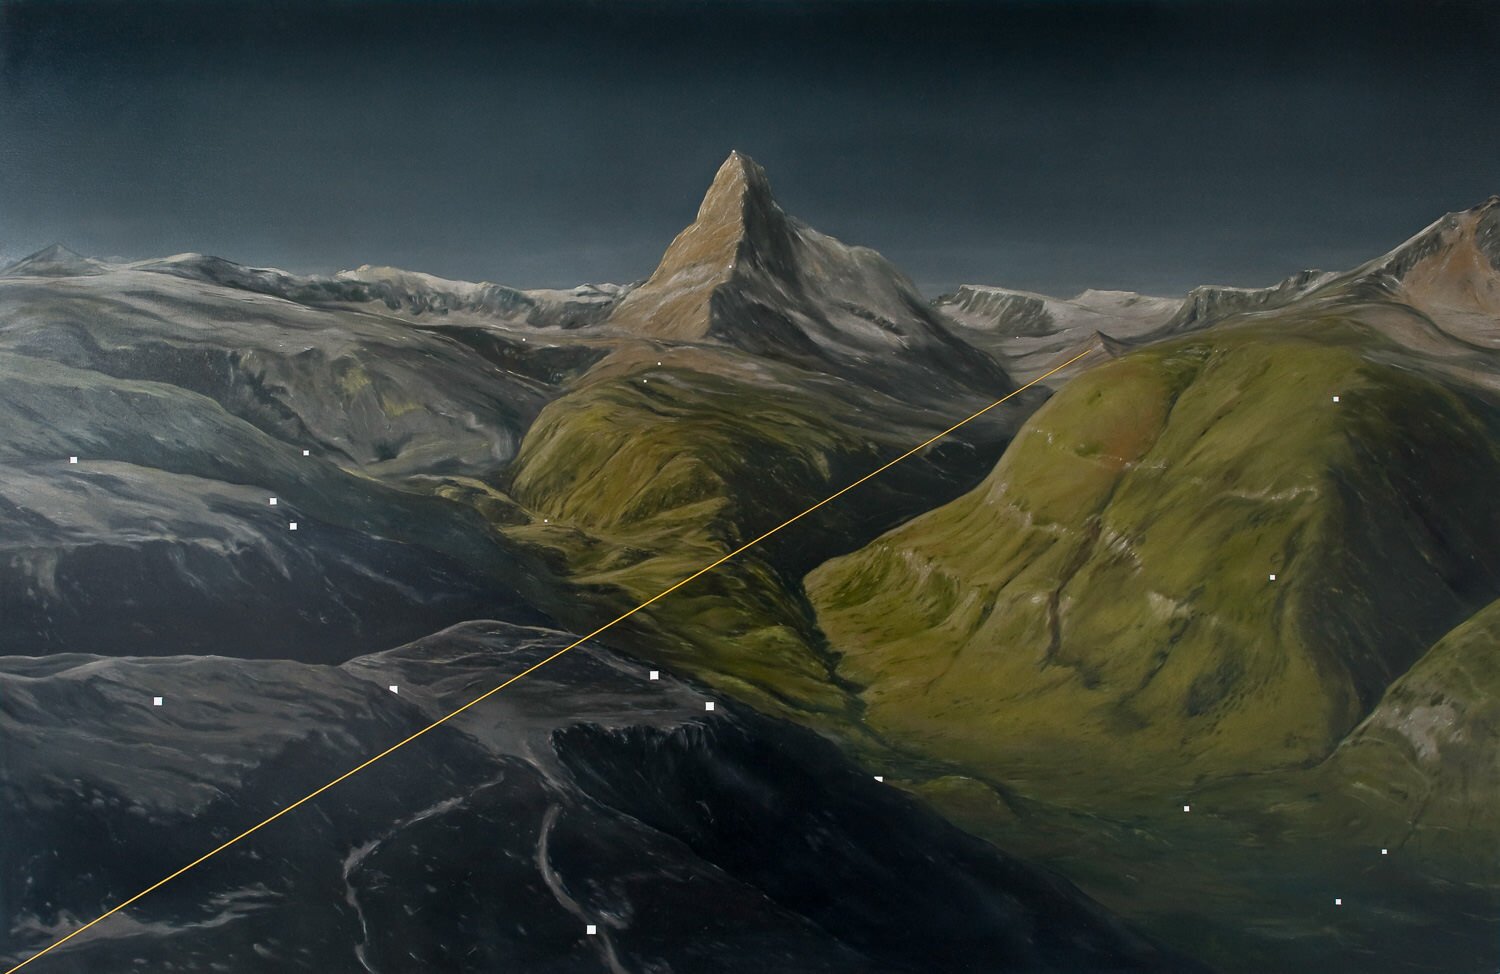 The Wildness Pleases I (Virtual Matterhorn) 2011, oil on canvas